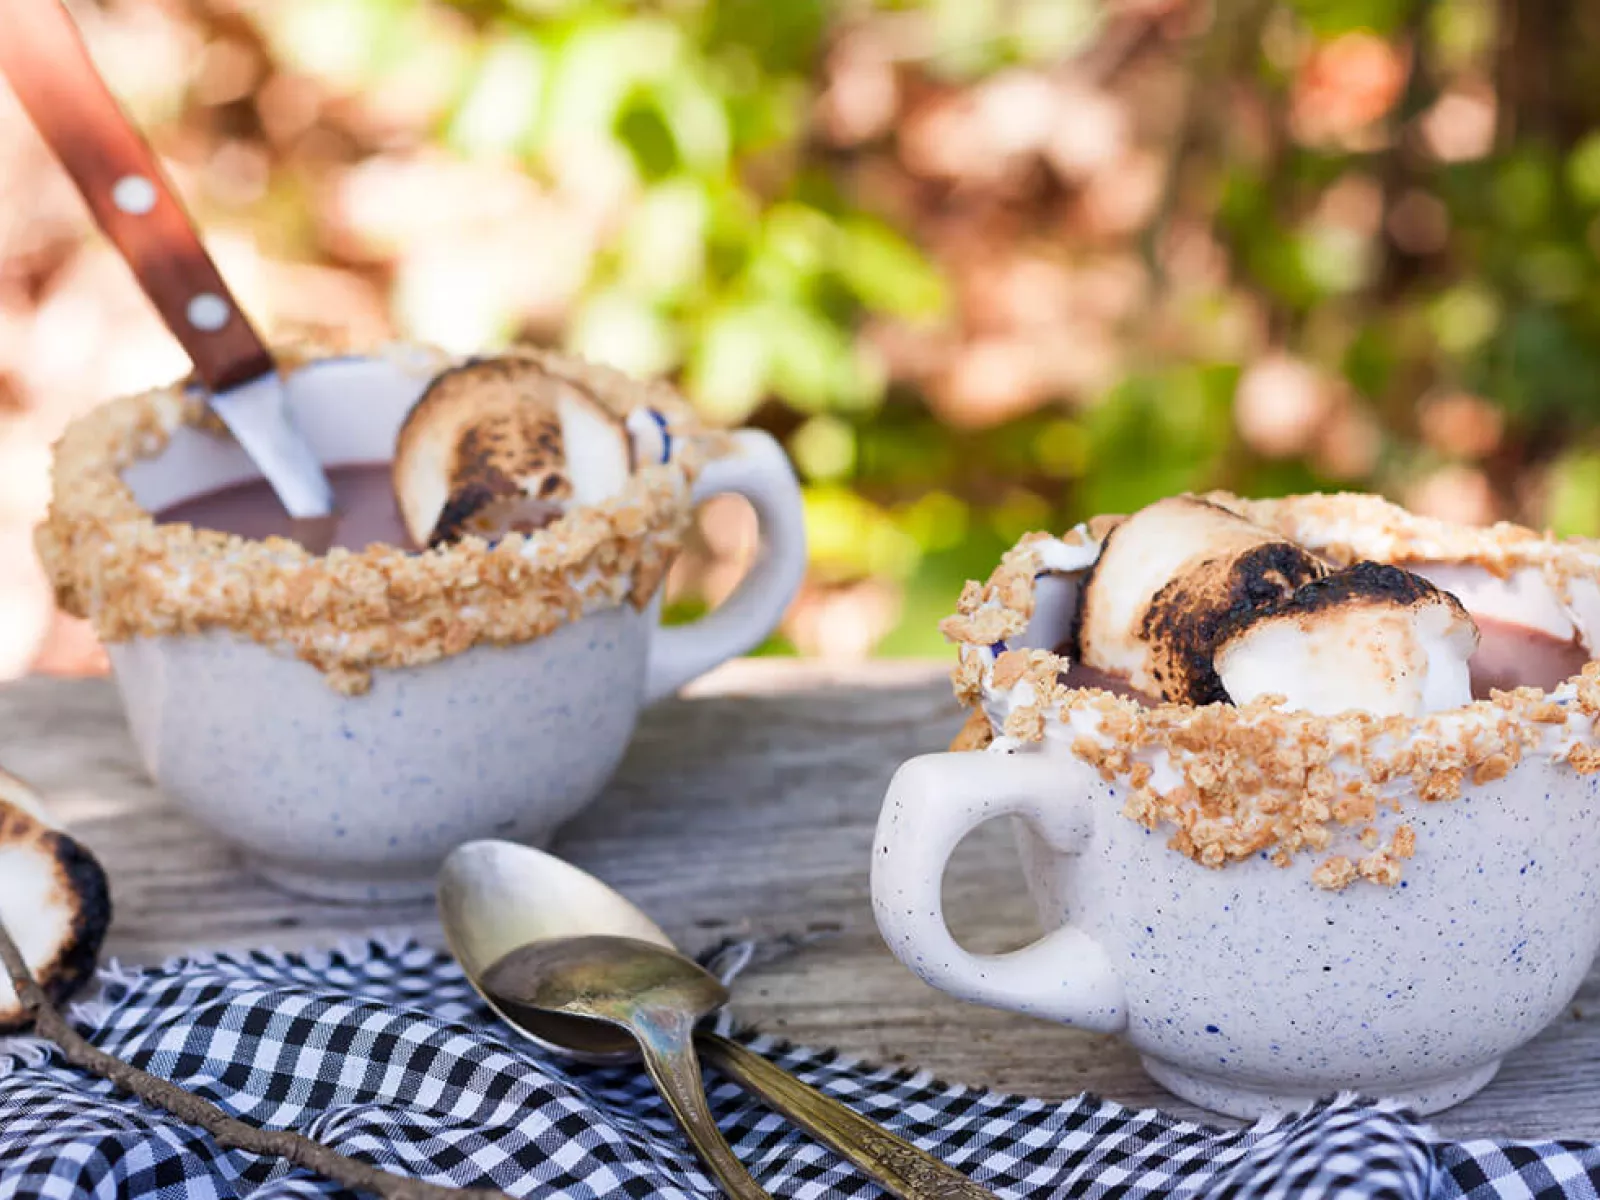 S'mores hot chocolate